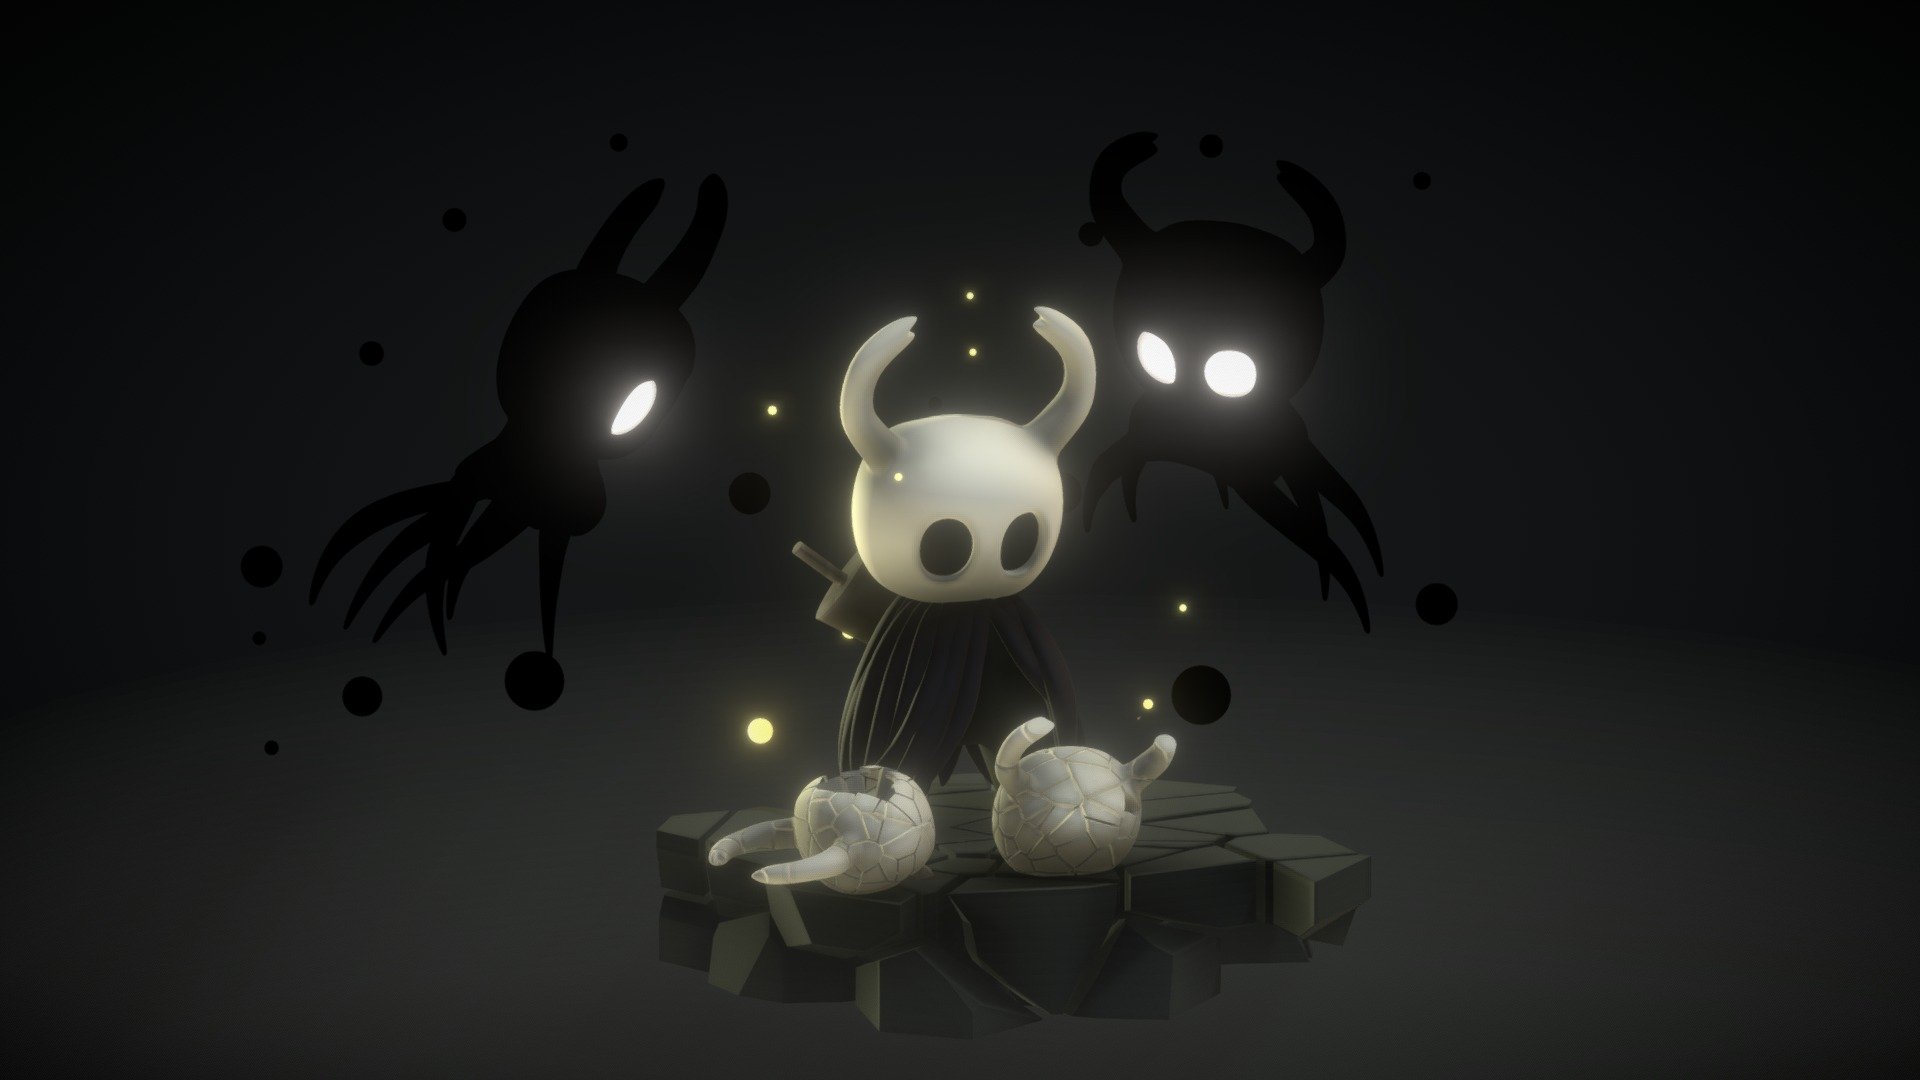 Fanart of Hollow Knight made in blender
Really like the hand drawn art style of this game.
Music by Y3
https://soundcloud.com/y-3h

I hope you all like this scene just as much as I do!!! - Echo's Of a Previous Life (Hollow Knight) - 3D model by Imad Hassan (@imad.hassan) 3d model